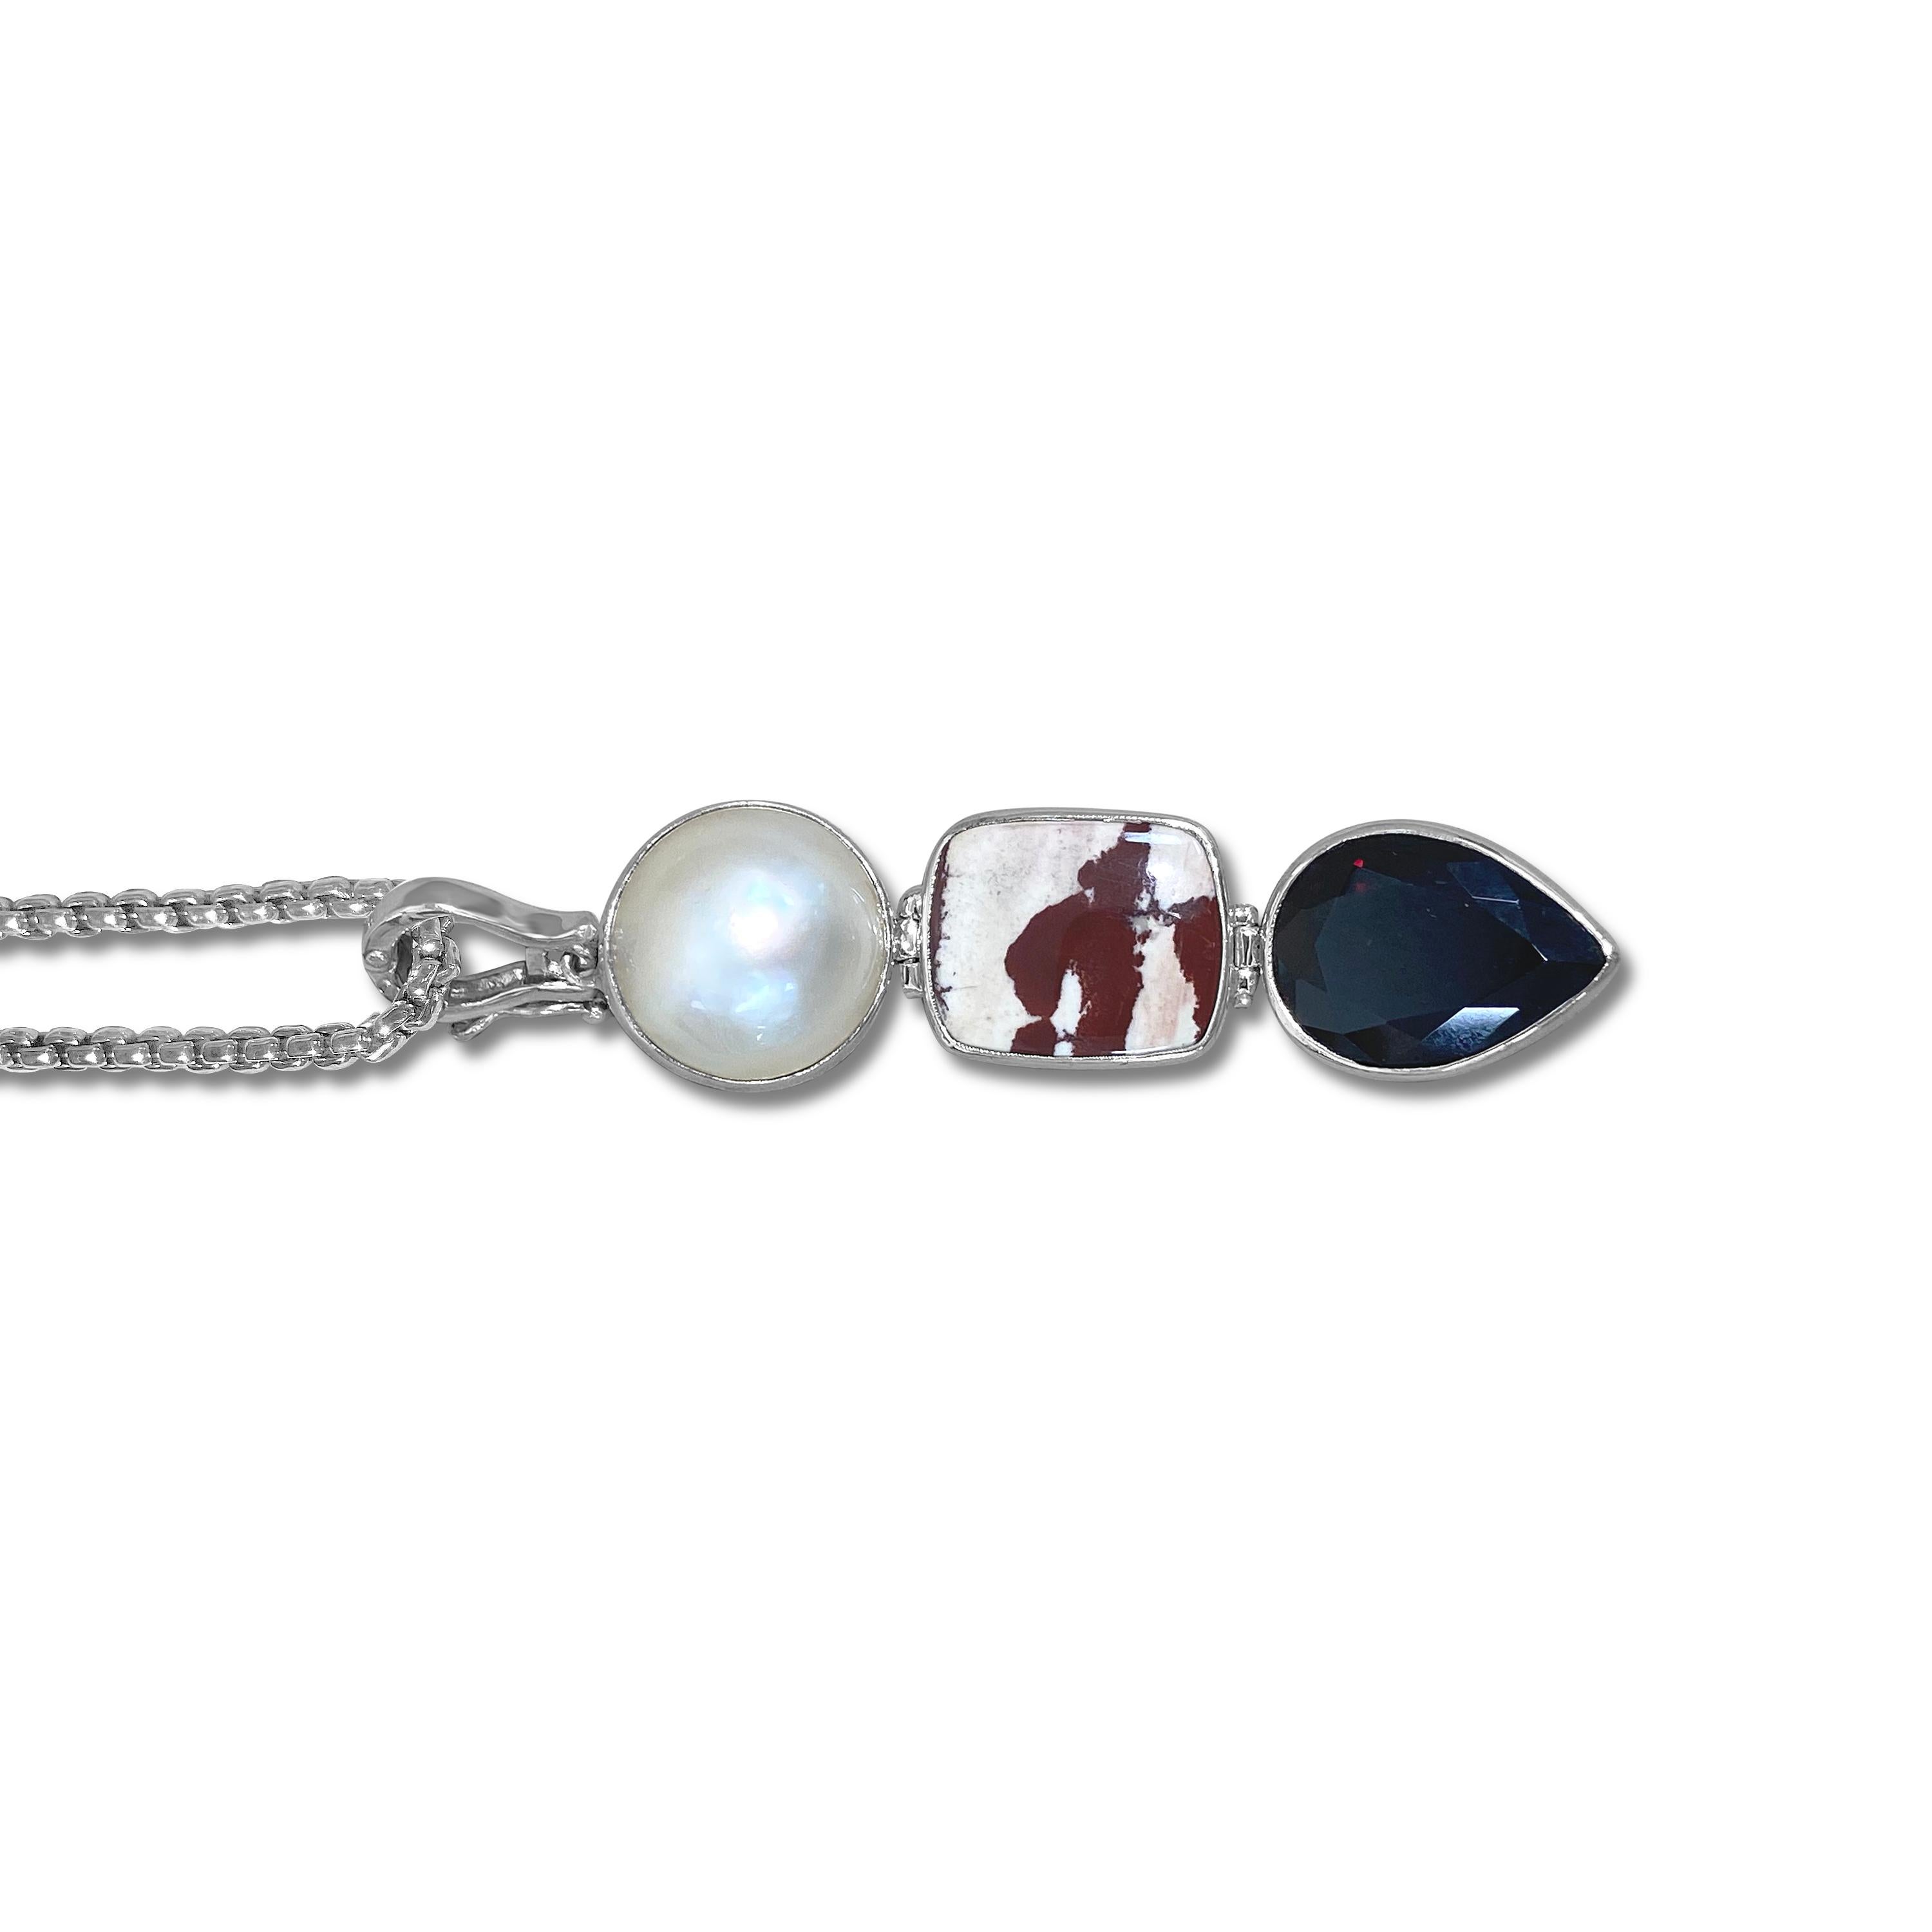 Cabochon Stephen Dweck Pearl, Jasper, and Garnet Pendant on a Sterling Silver Chain